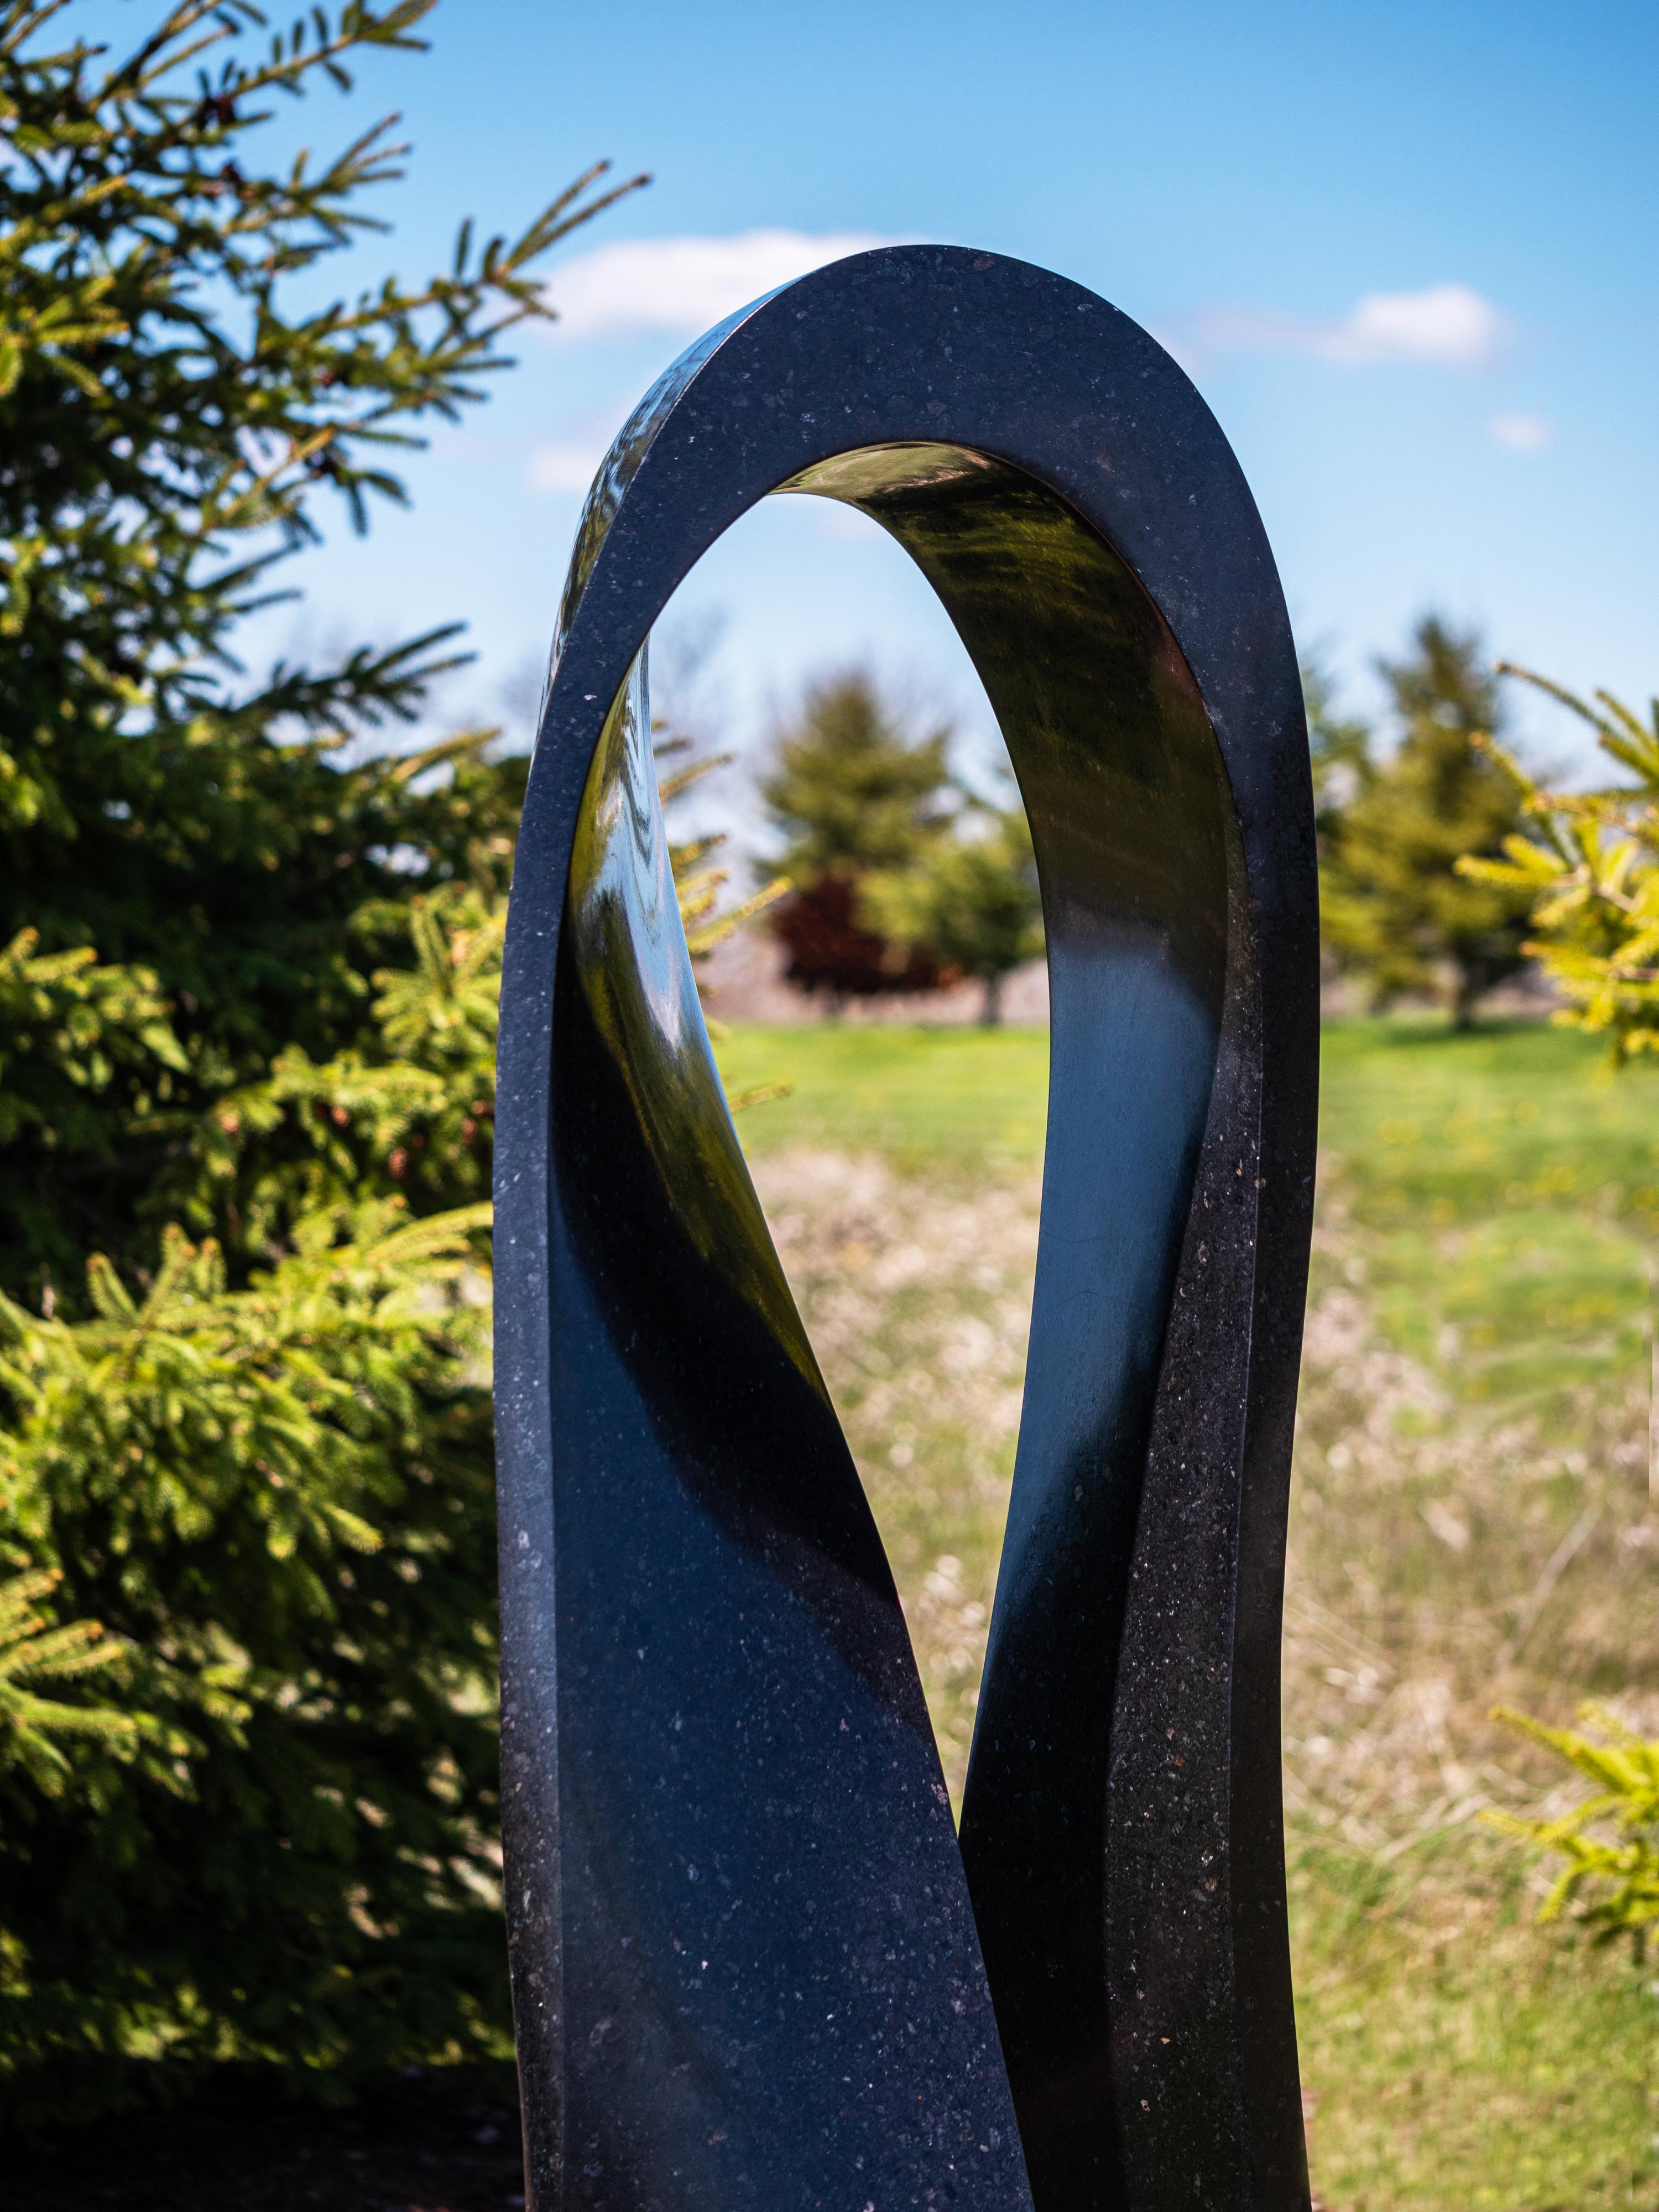 Smooth surfaced, black granite has been engineered by Jeremy Guy into an elegant outdoor sculpture in the form of a mobius strip. Discovered by the German mathematician August Ferdinand Möbius, a Möbius strip is a surface with only one side and only